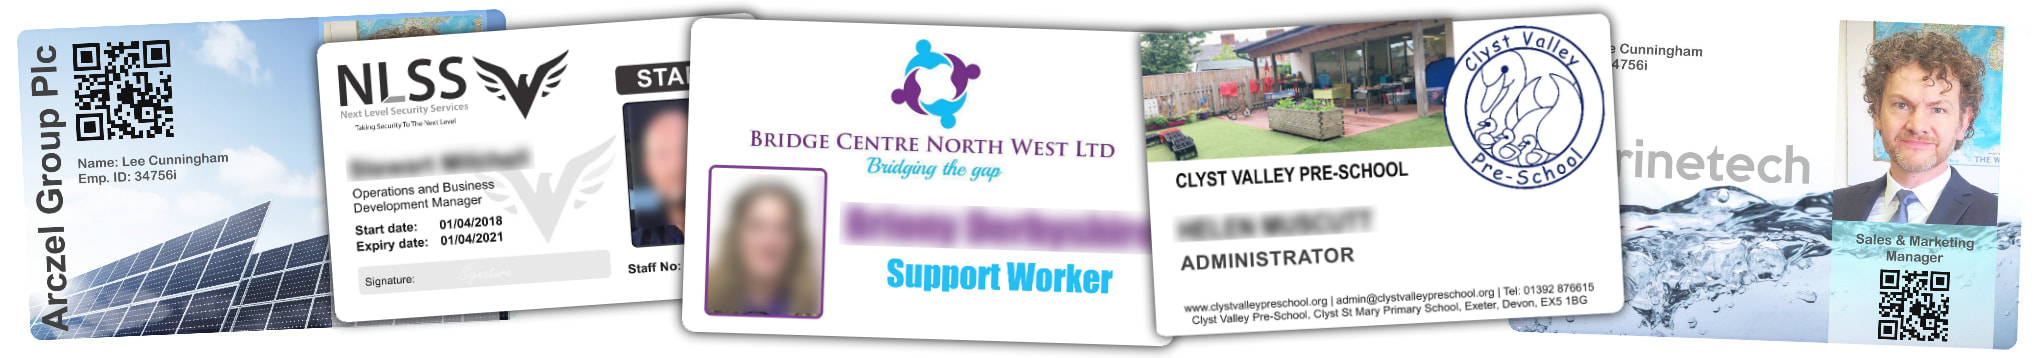 Telford examples of staff photo ID cards | samples of employee Identity card printing | Workers ID cards printed in 